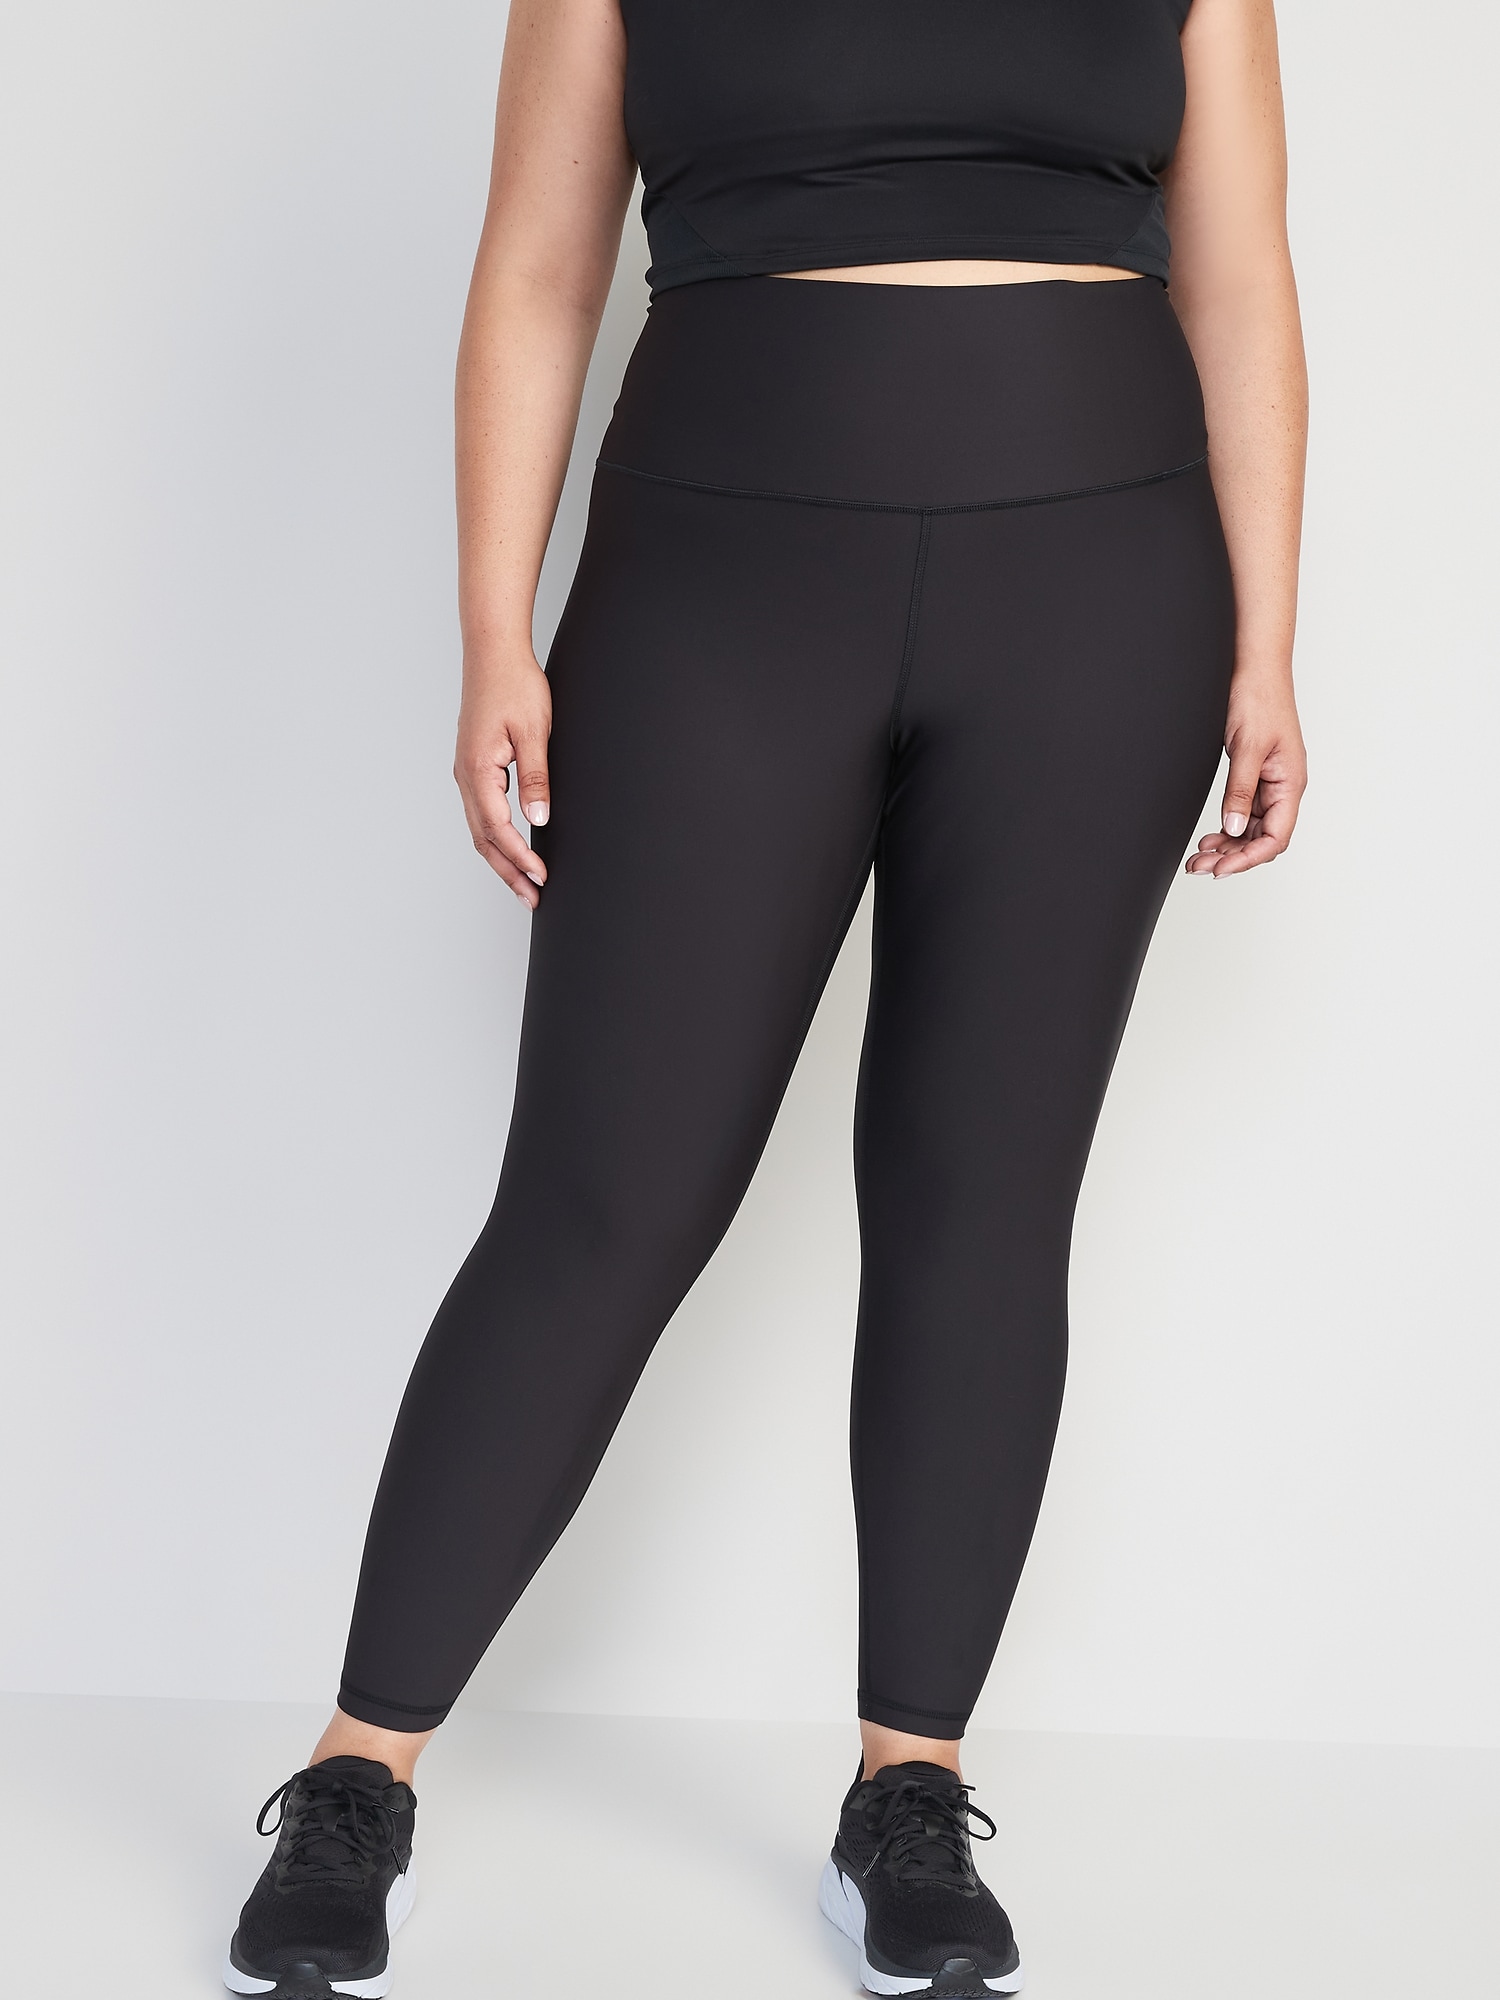 Active by Old Navy Black Leggings Size M (Tall) - 31% off